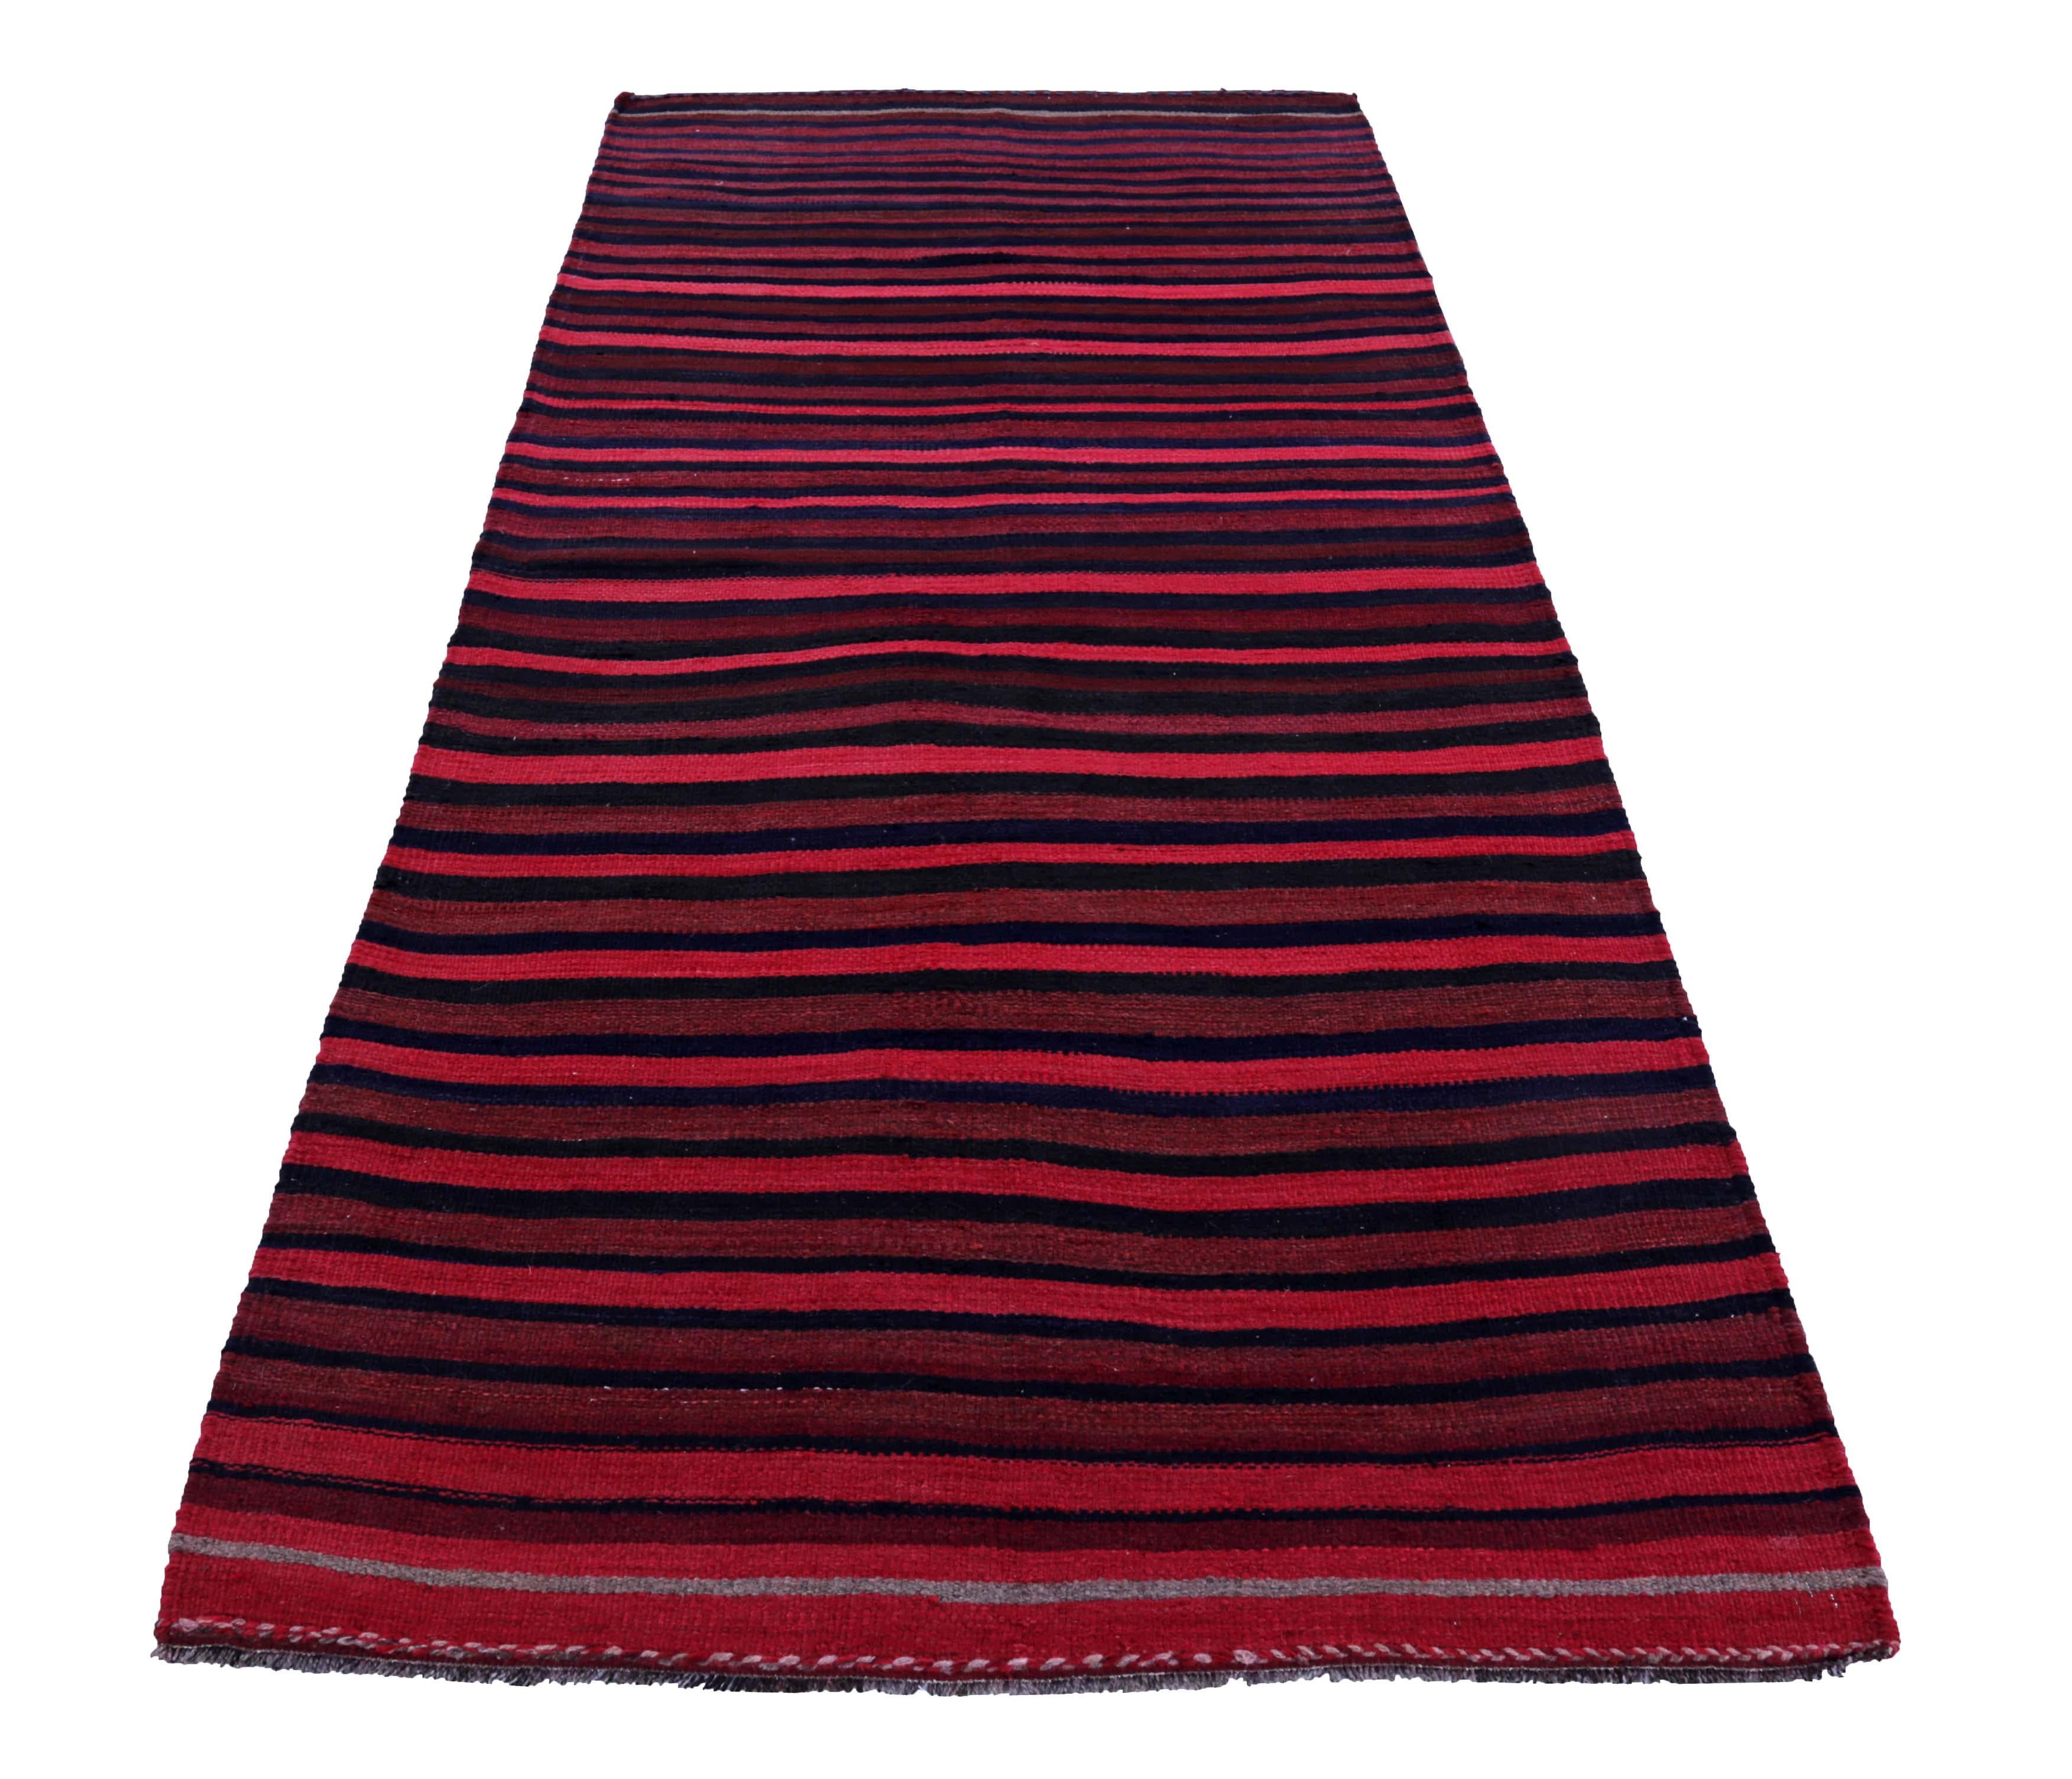 Turkish rug handwoven from the finest sheep’s wool and colored with all-natural vegetable dyes that are safe for humans and pets. It’s a traditional Kilim flat-weave design featuring pink, navy and red stripe patterns. It’s a stunning piece to get